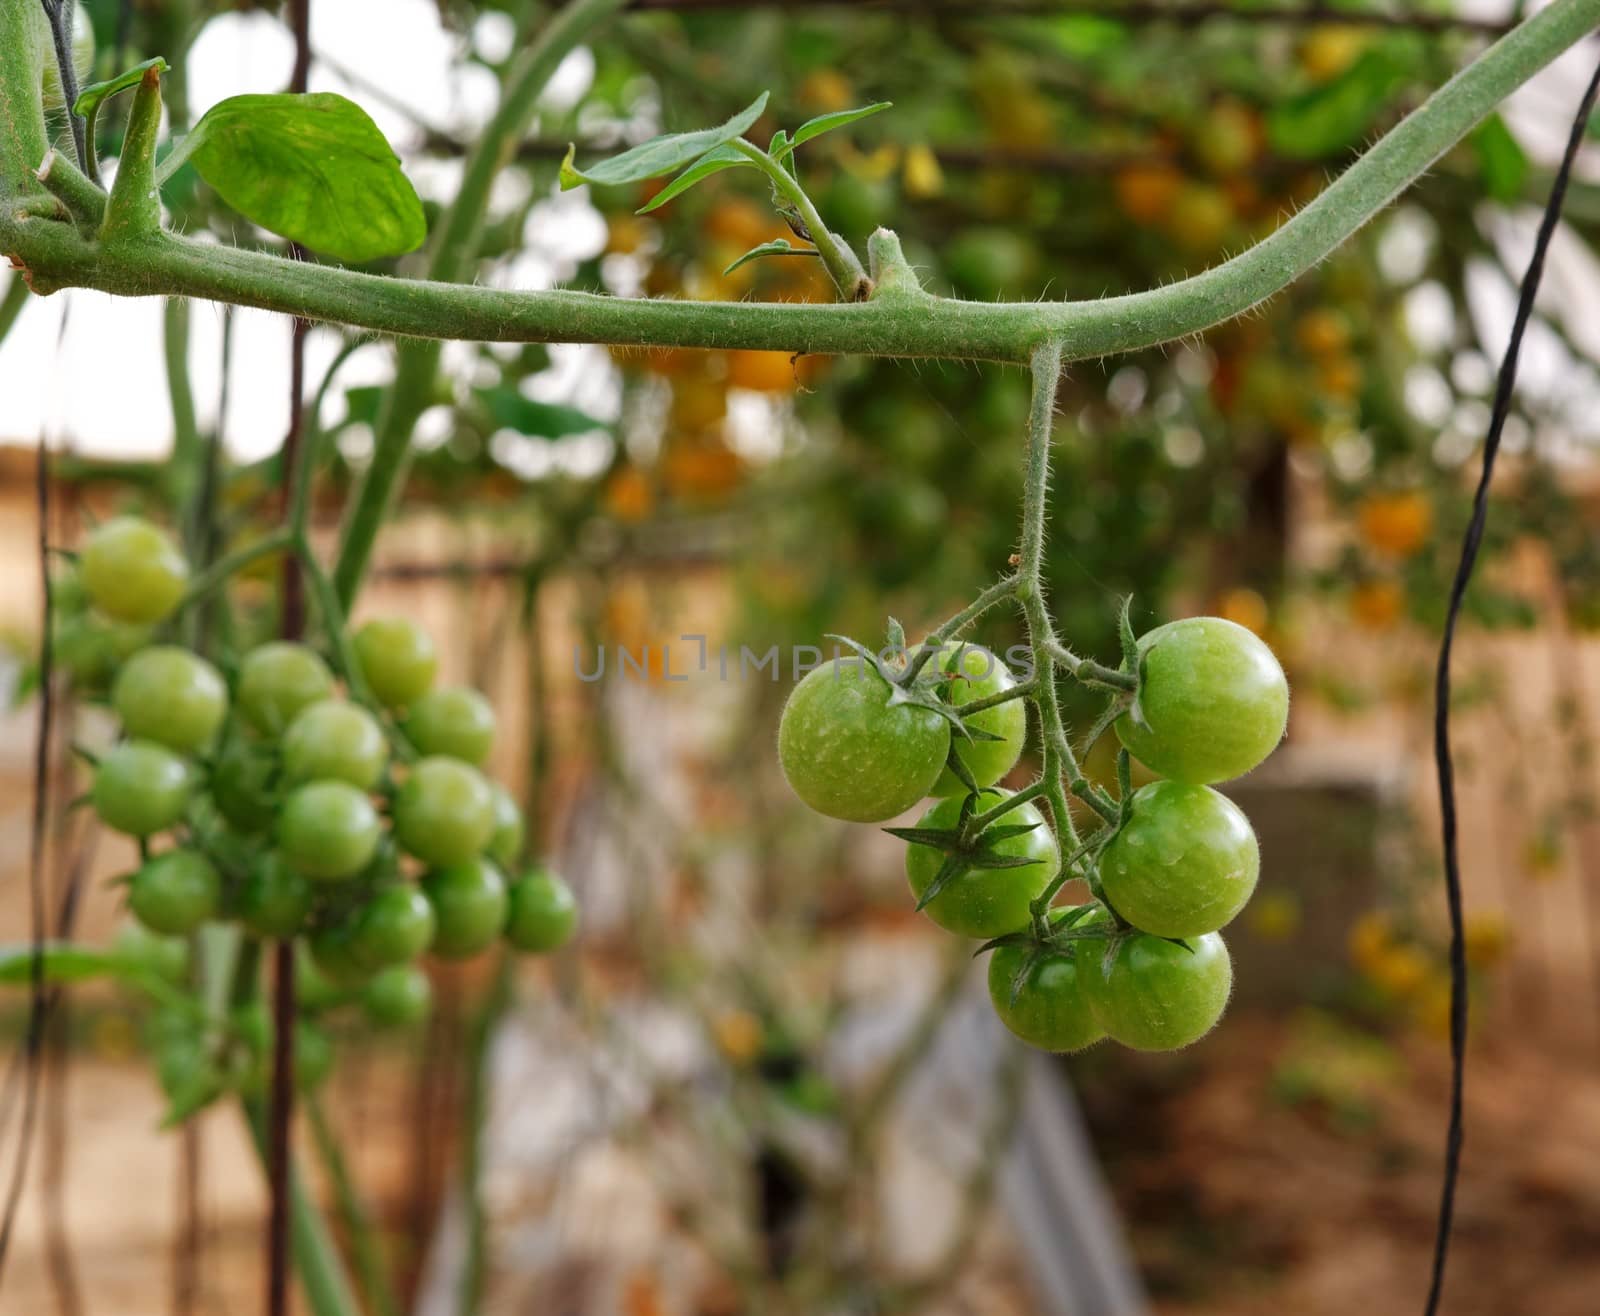 Green cherry tomatoes growing on the vine